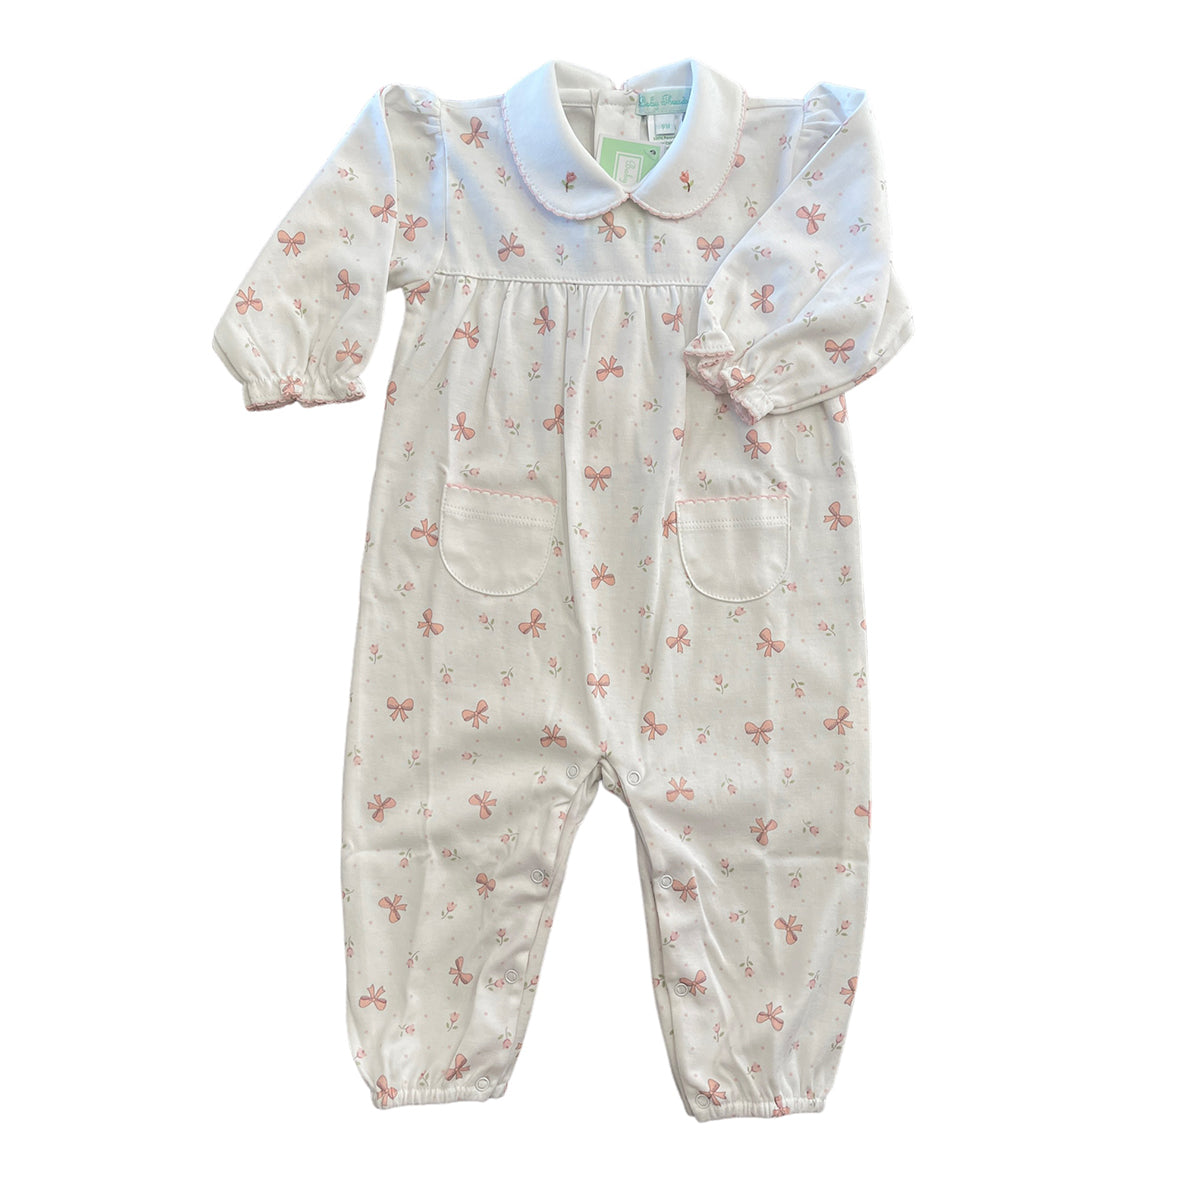 Baby Threads Bows Long Romper